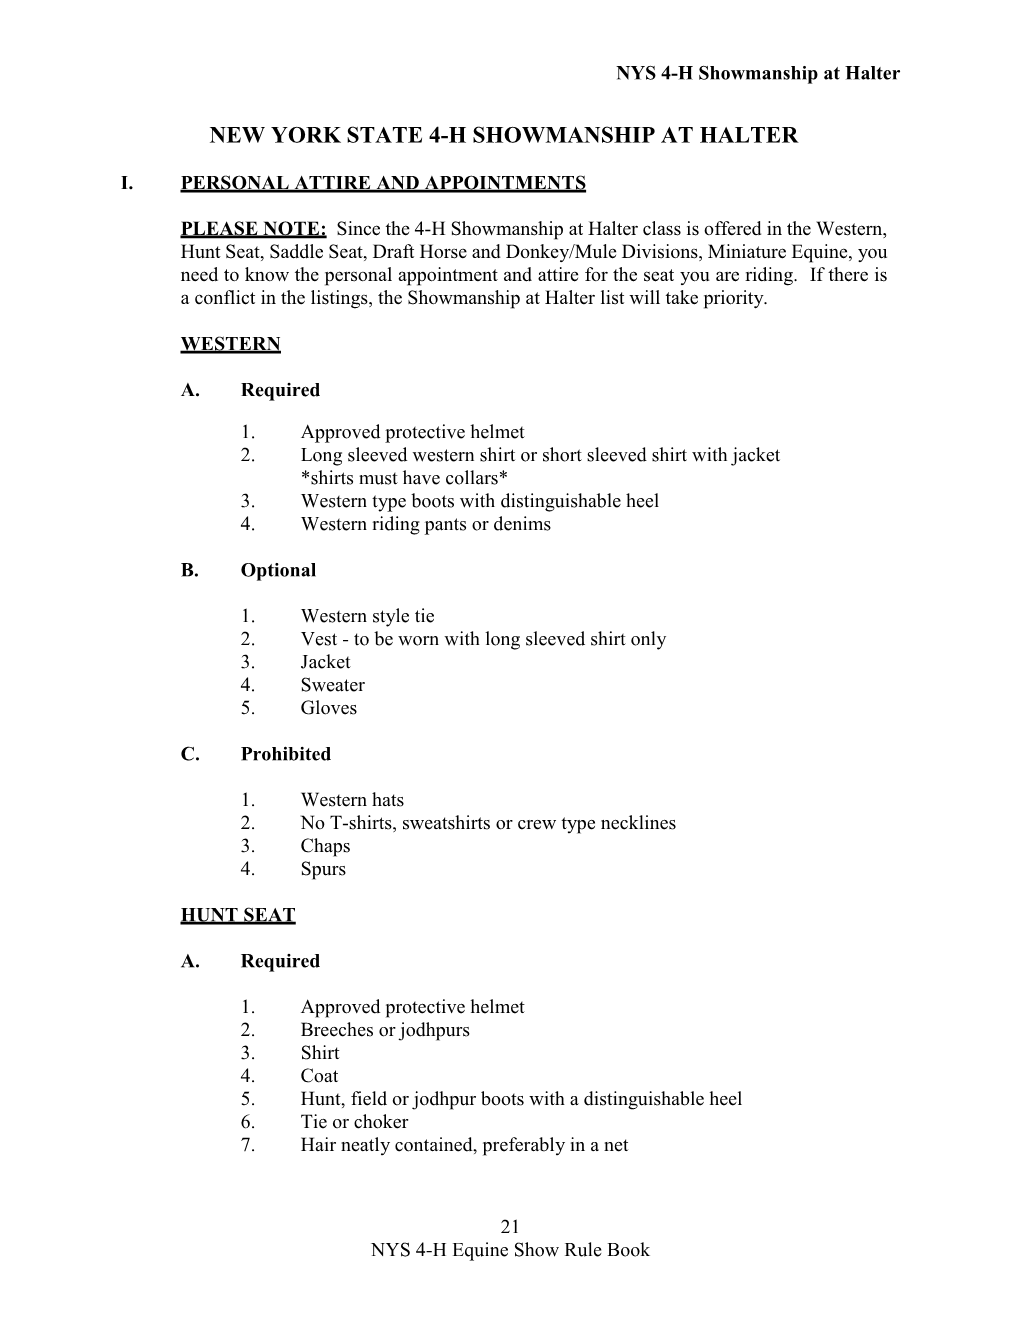 2018 NYS 4H Horse Program Equine Show Rule Book